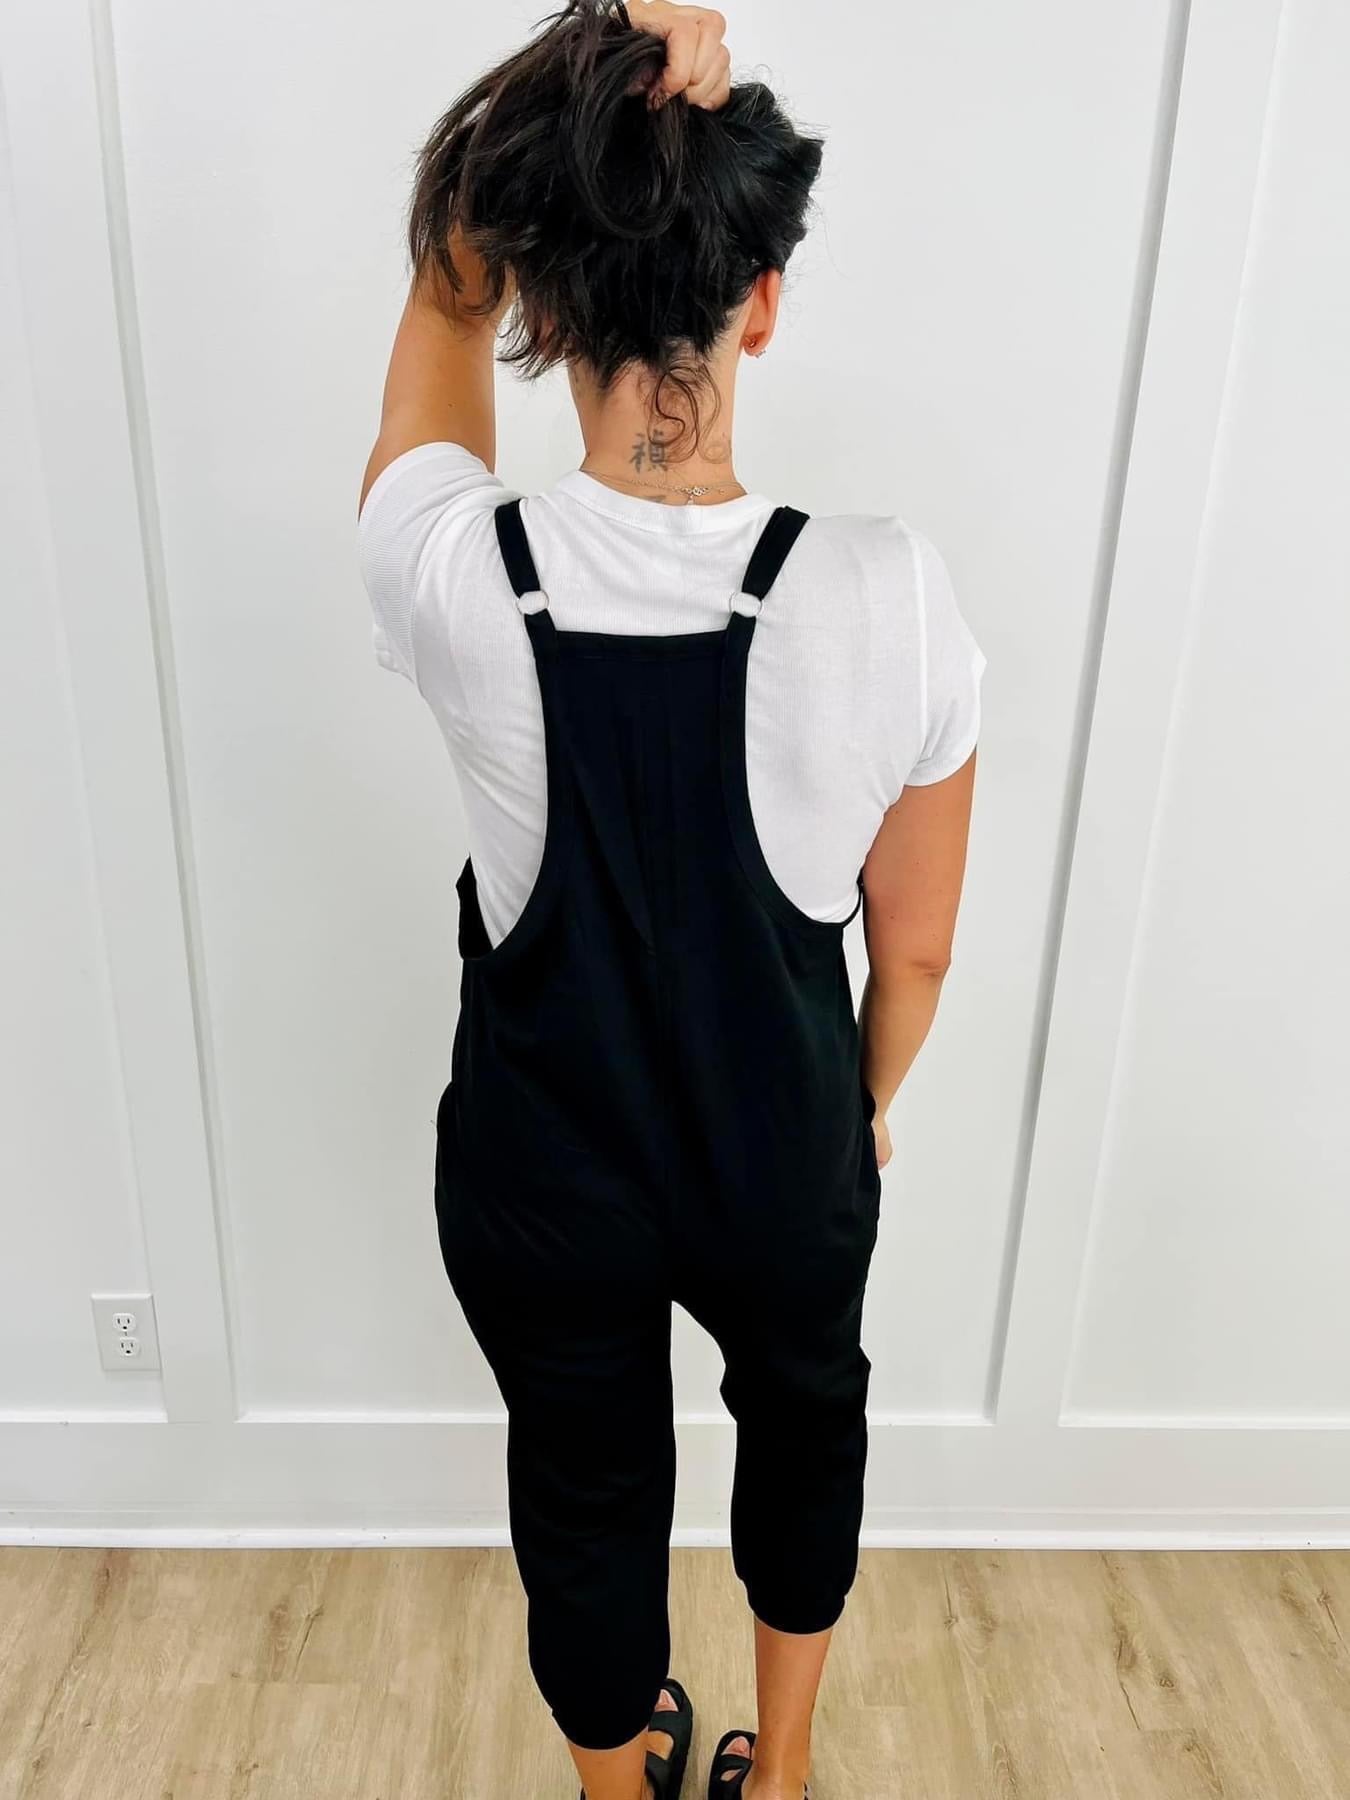 Shirley & Stone Becky Jumpsuit